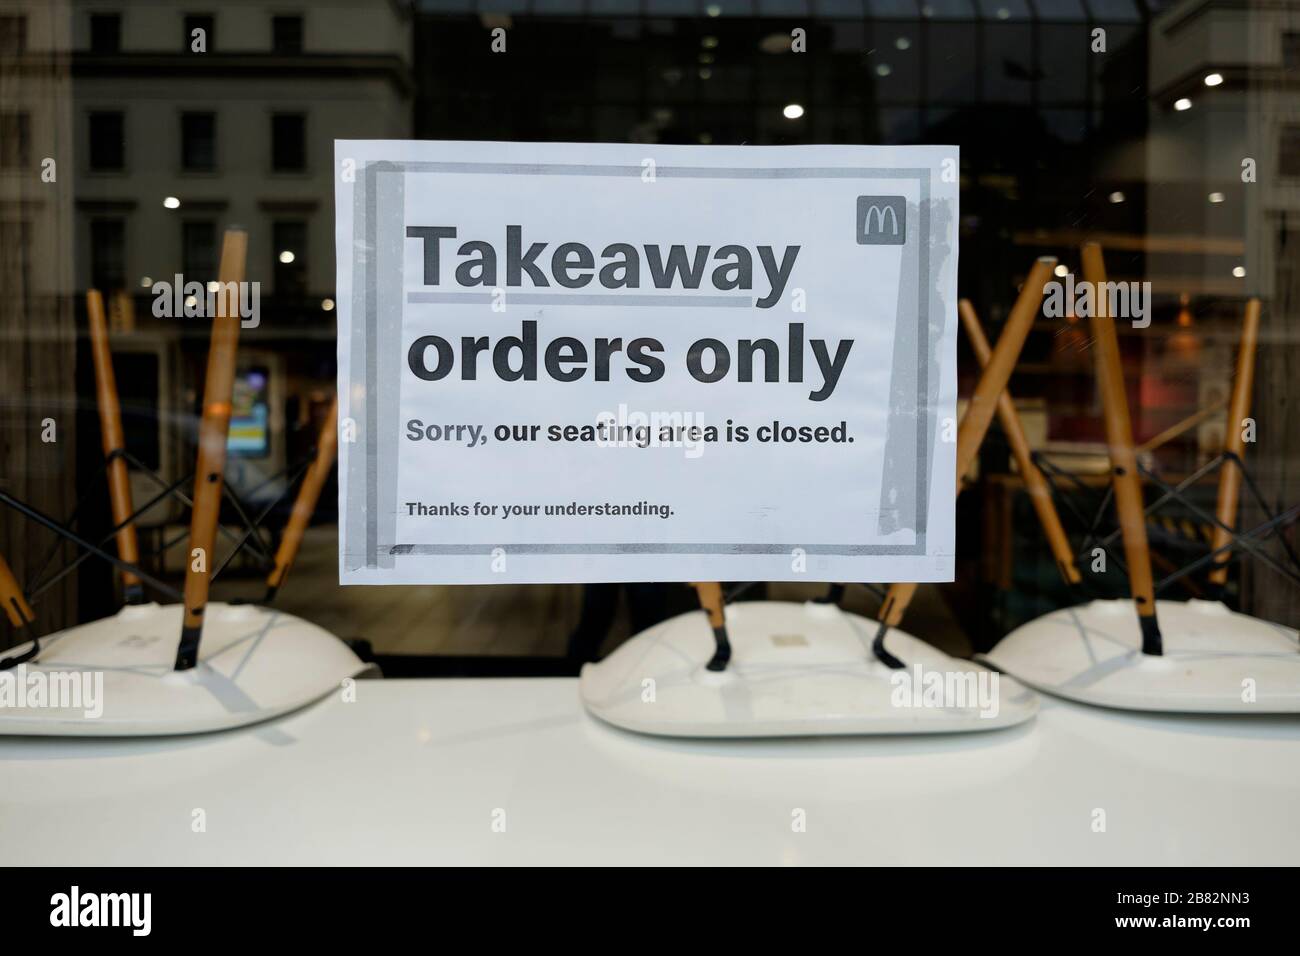 London, UK.19 March 2020. Notice at entrance to McDonalds fast food outlet informing customers of  takeaway orders only. Stock Photo